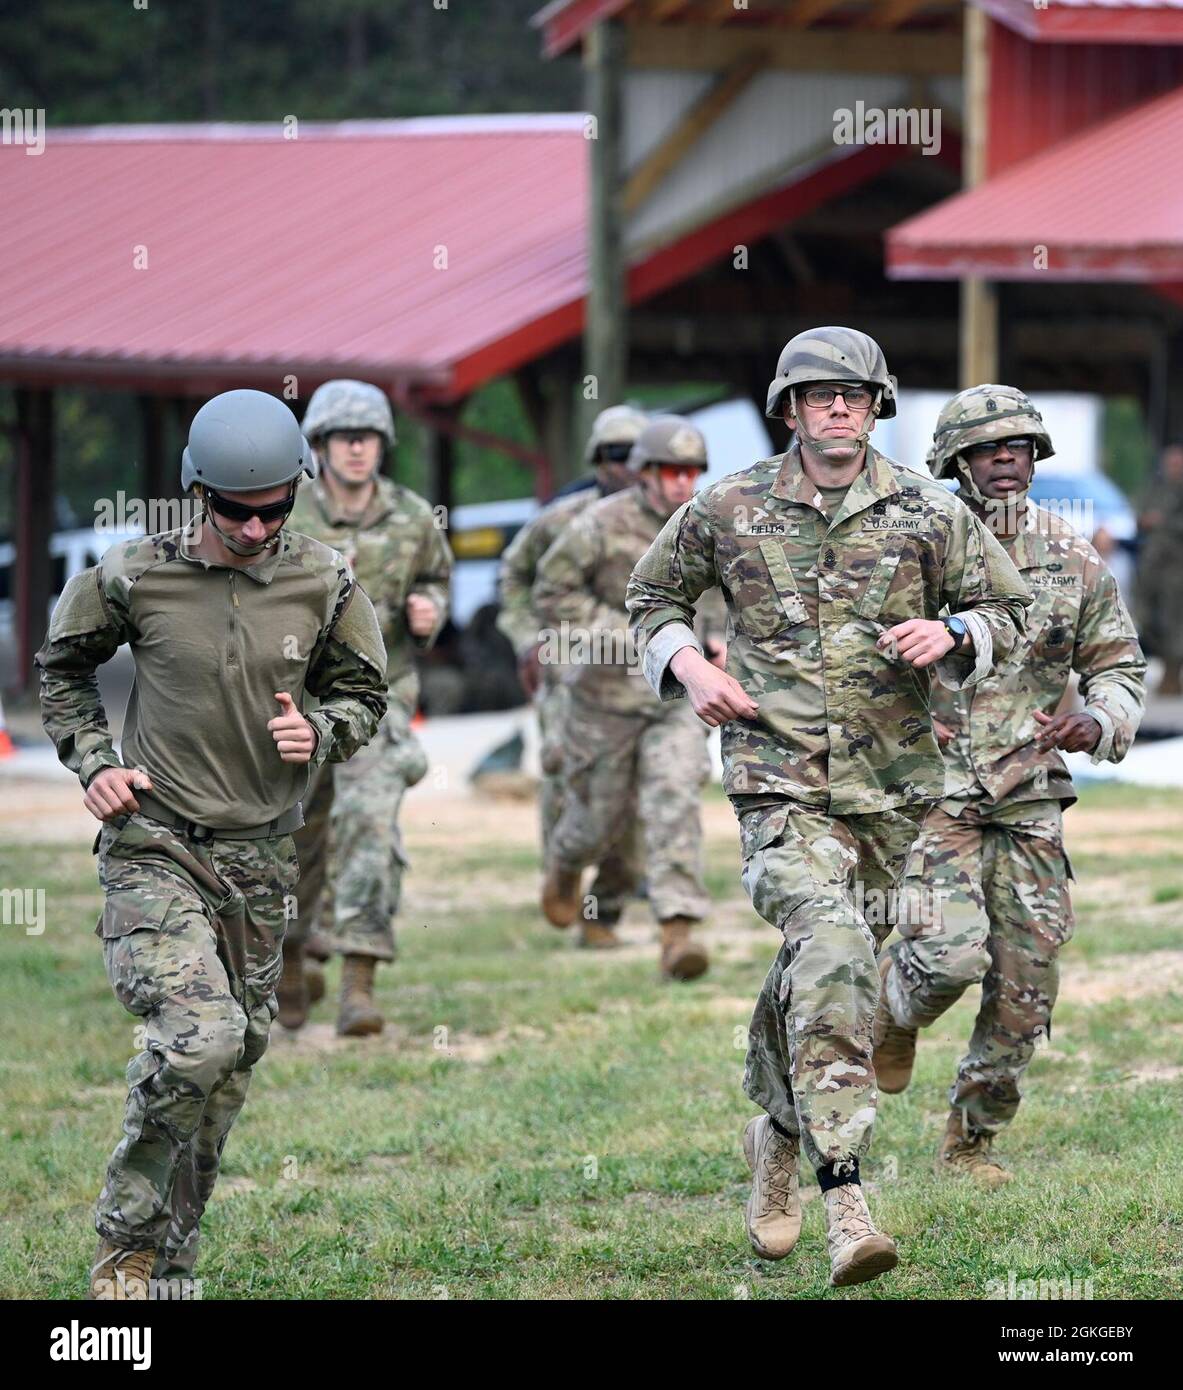 Soldiers from Support Battalion, 1st Special Warfare Training Group (Airborne) run in a race during the battalion's Commander's Cup competition at Fort Bragg, North Carolina April 15, 2021. The Soldiers from each company competed in a ruck march, obstacle course, land navigation, Jeopardy-themed trivia contest and stress shoot with pistols and rifles. Stock Photo